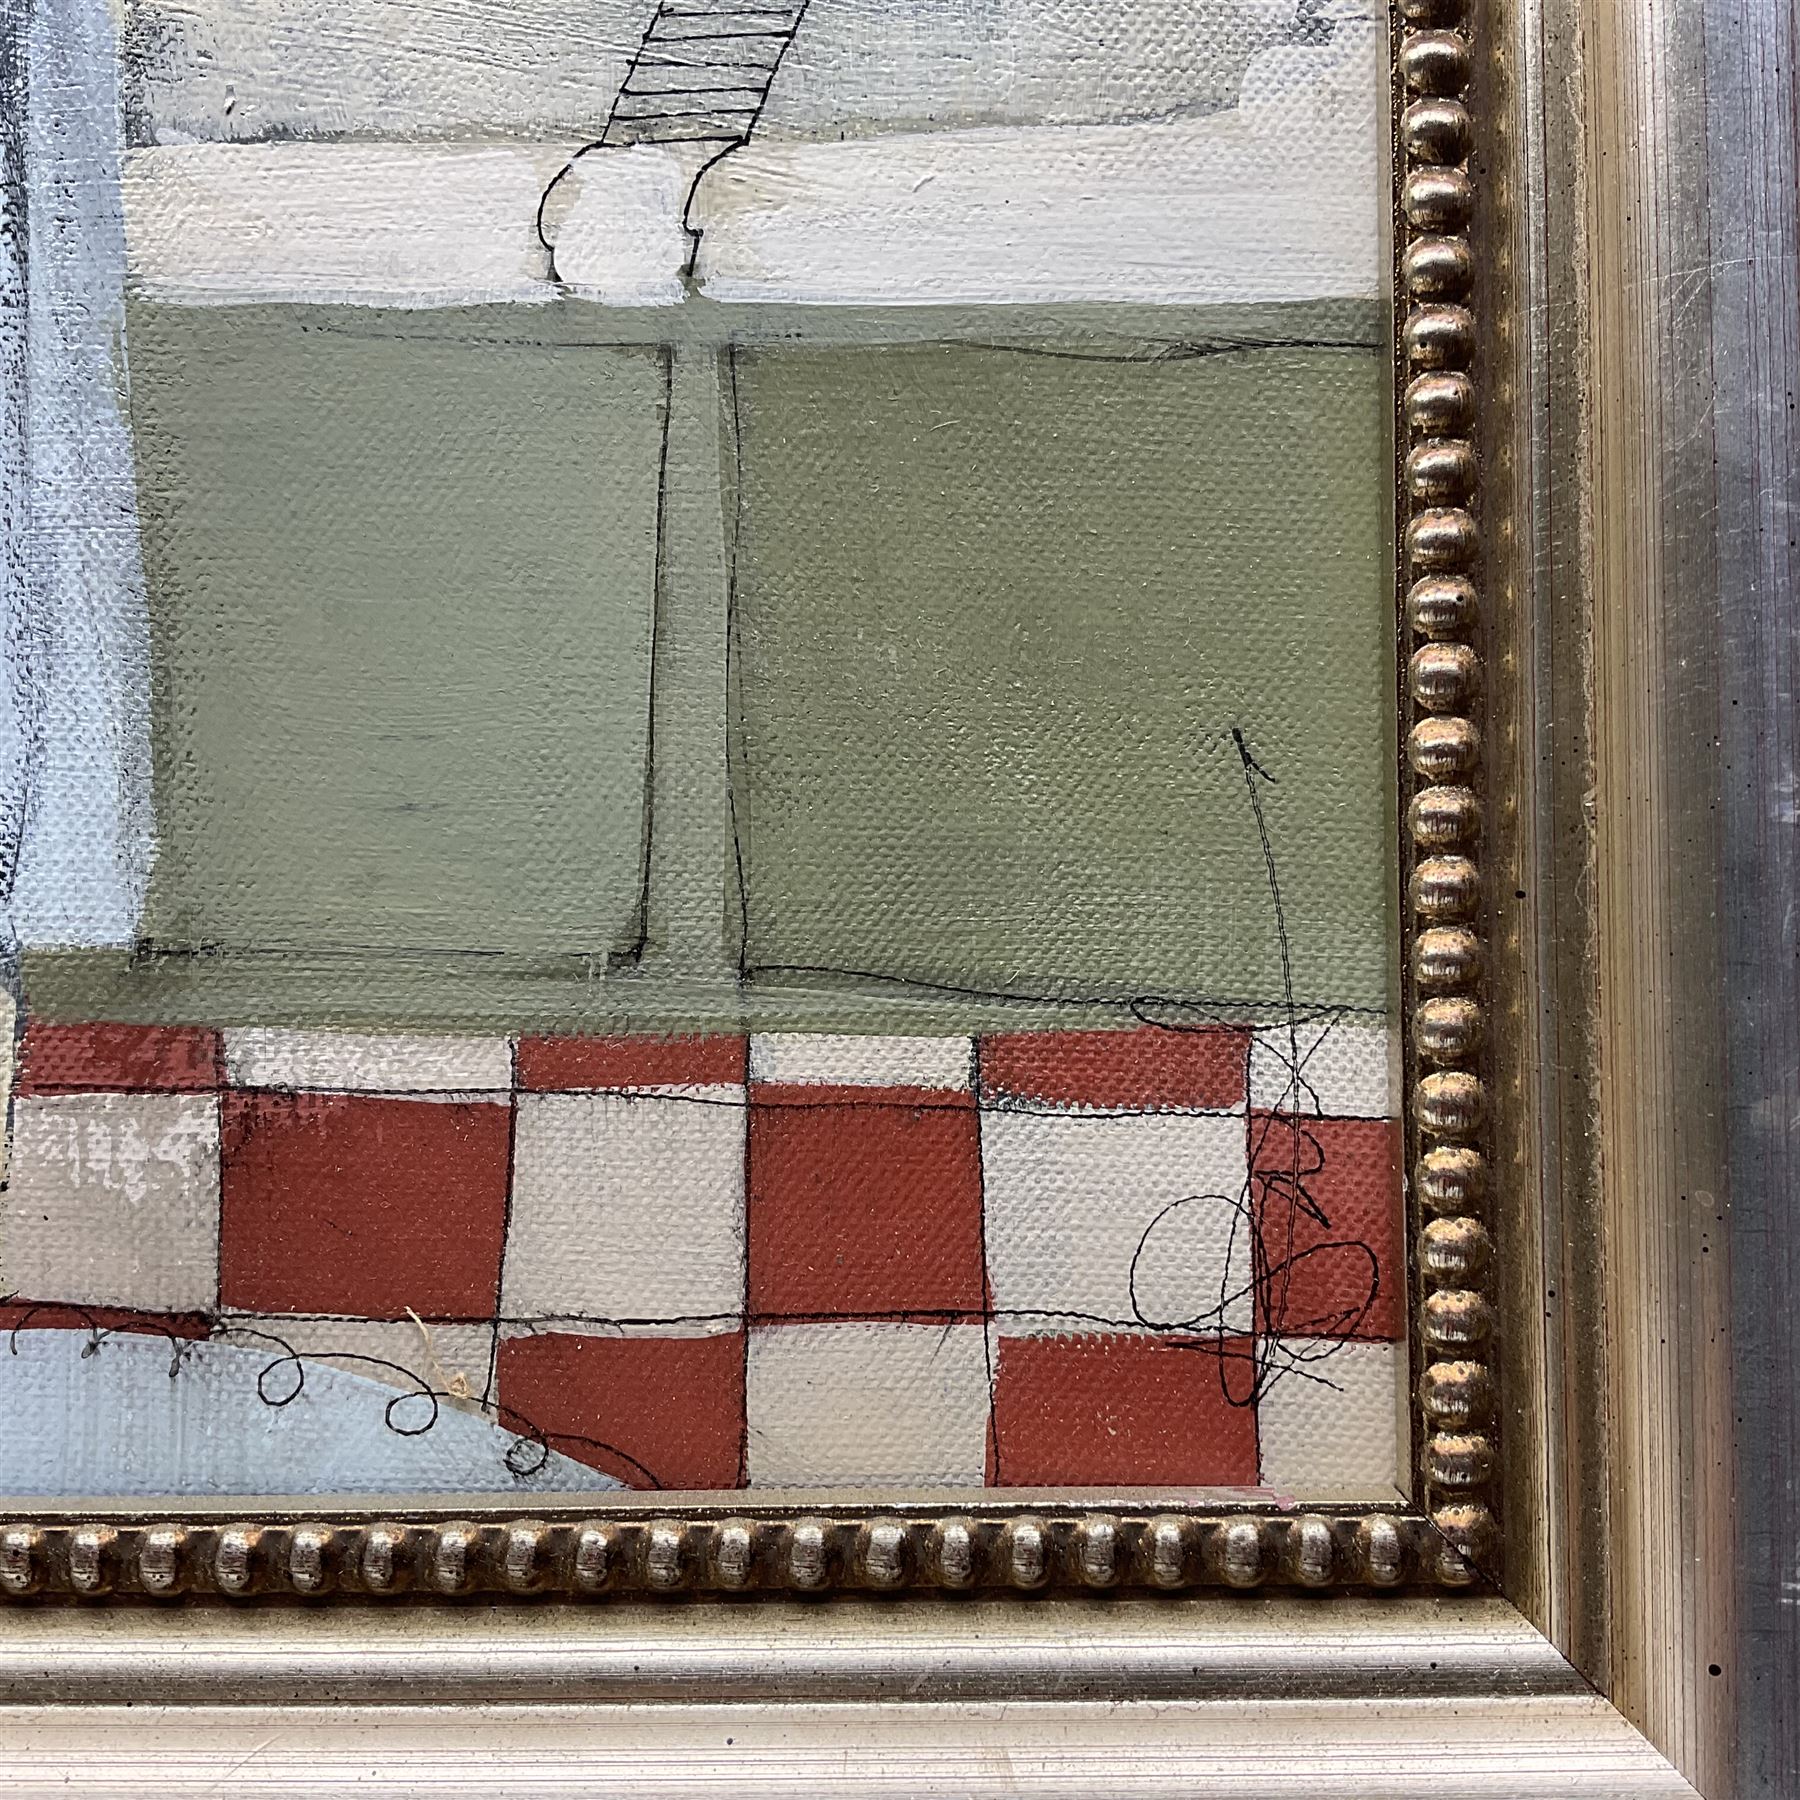 Angela Smyth (Yorkshire Contemporary): In the Chequered Bathroom - Image 3 of 3